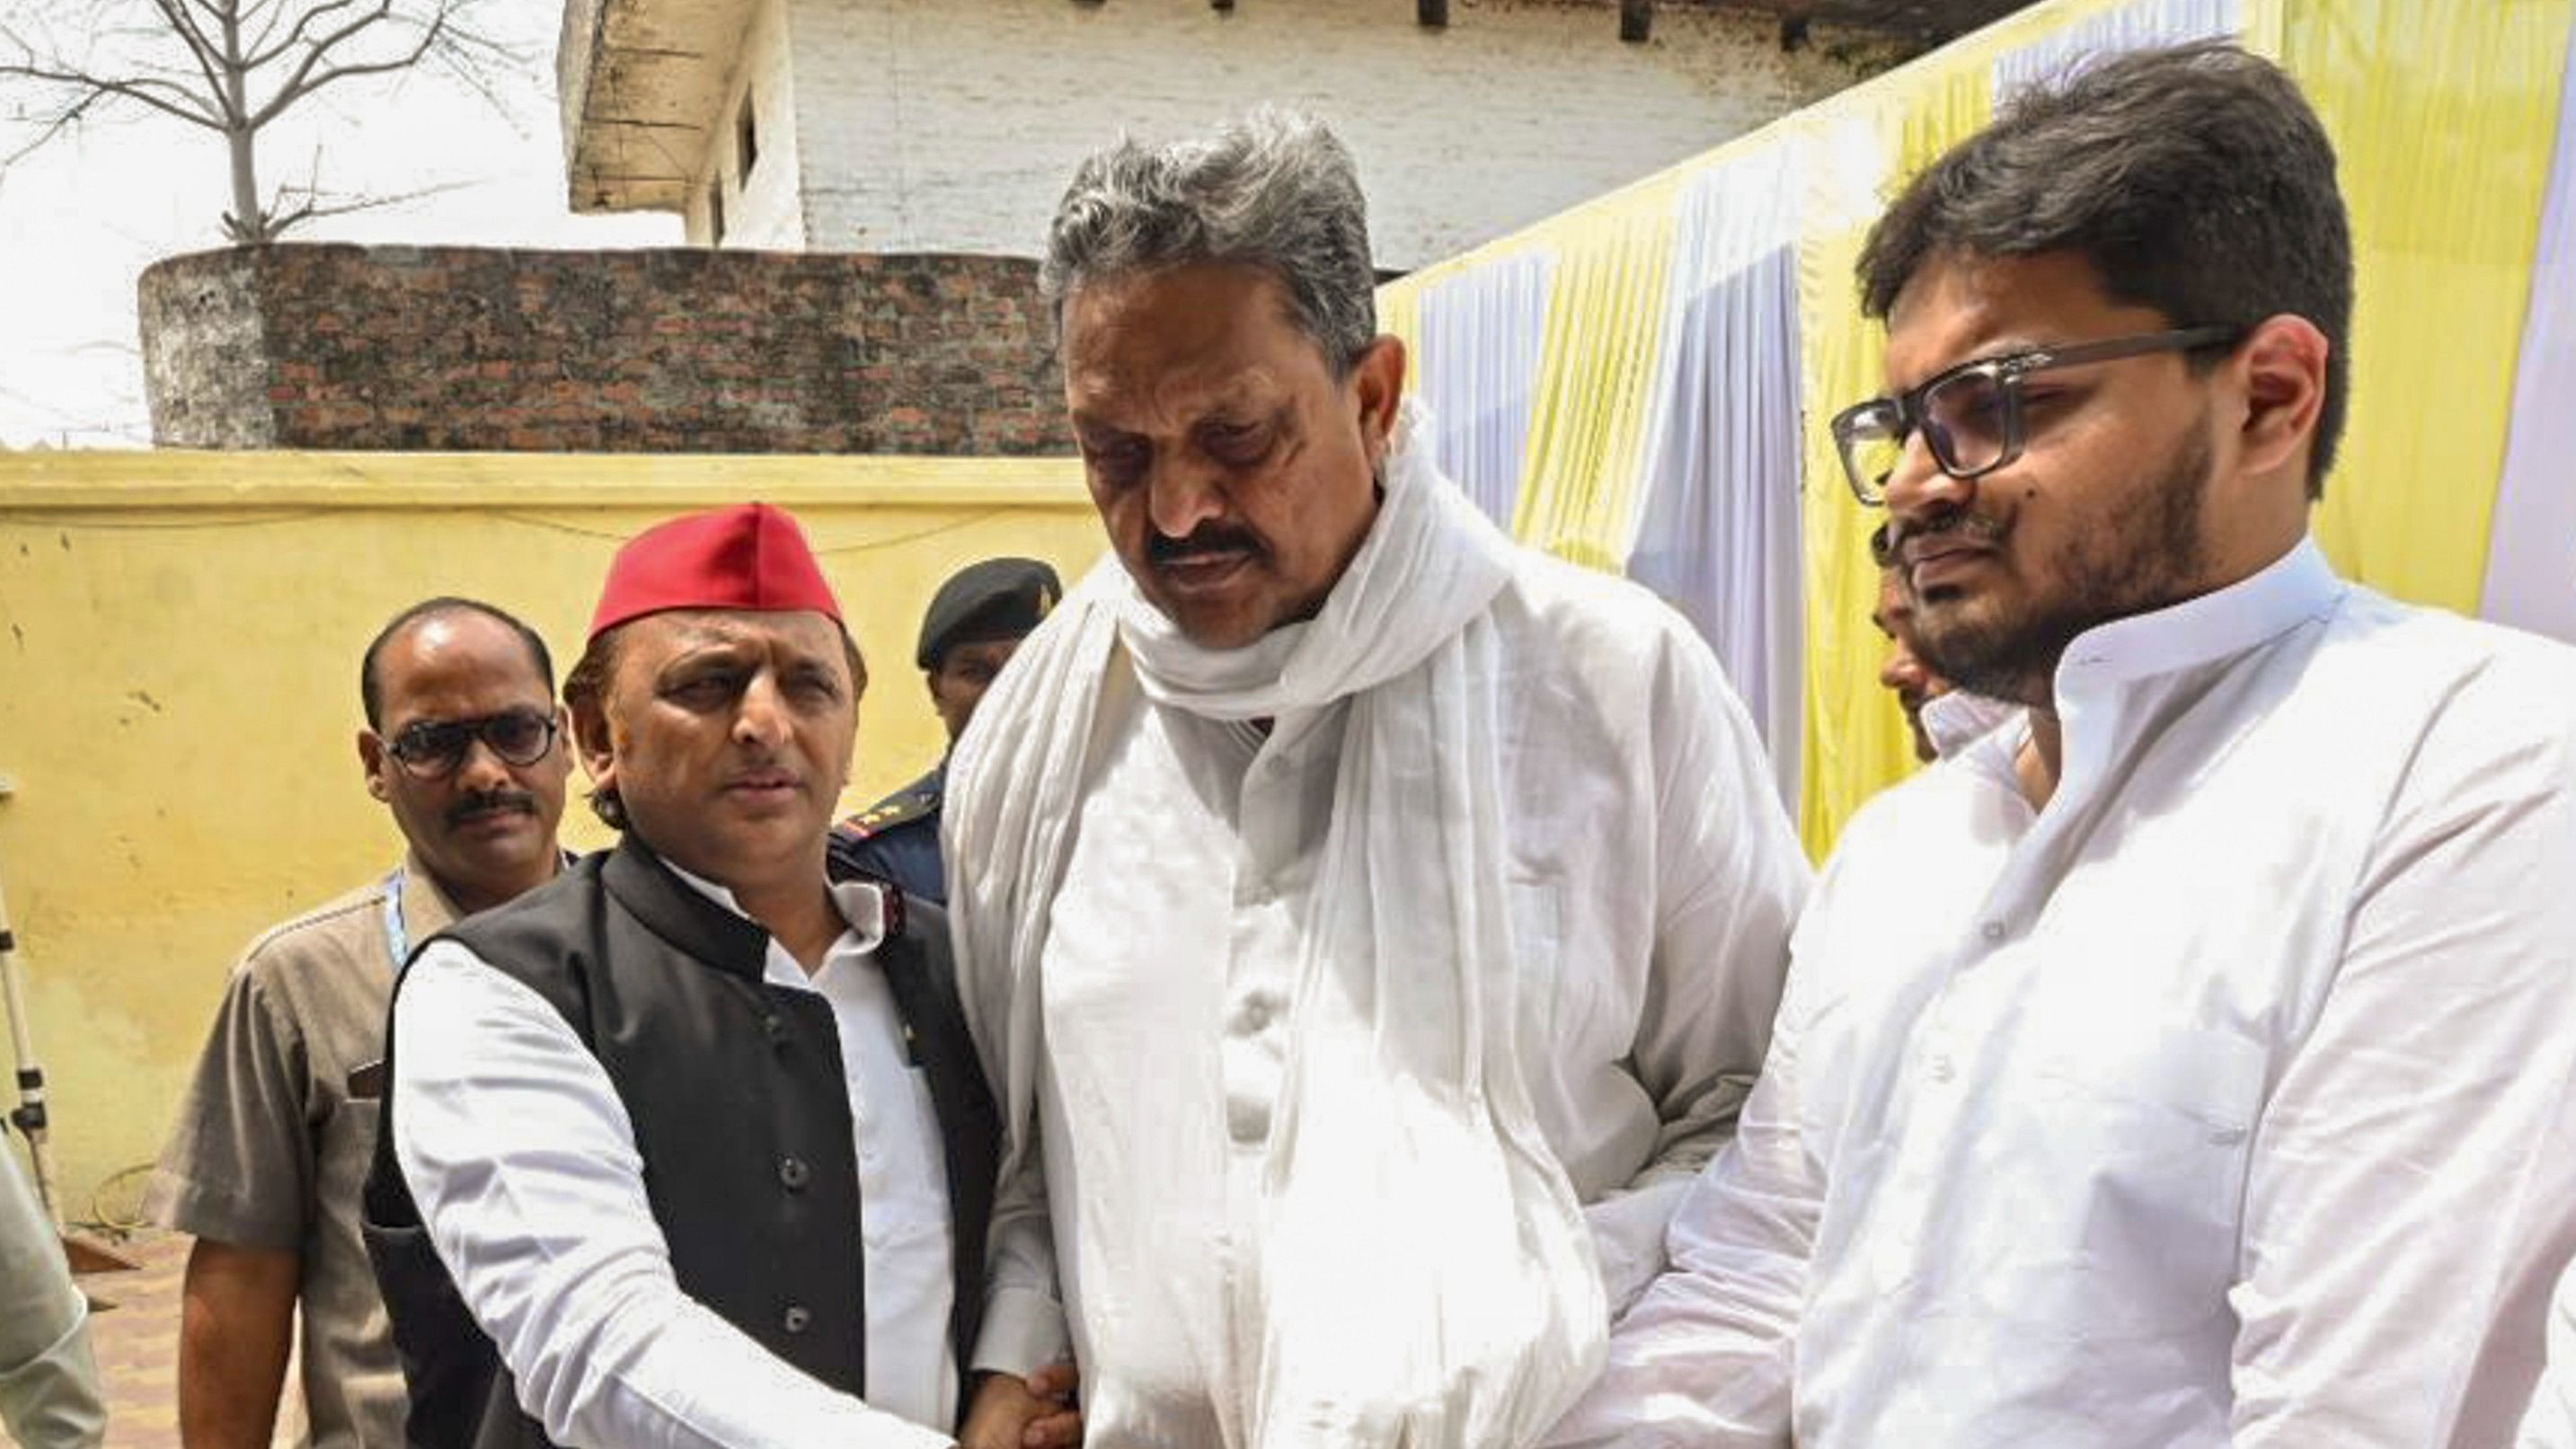 <div class="paragraphs"><p>Samajwadi Party chief Akhilesh Yadav meets family members of late gangster-turned-politician Mukhtar Ansari at the latter's residence, in Ghazipur, on Sunday</p></div>